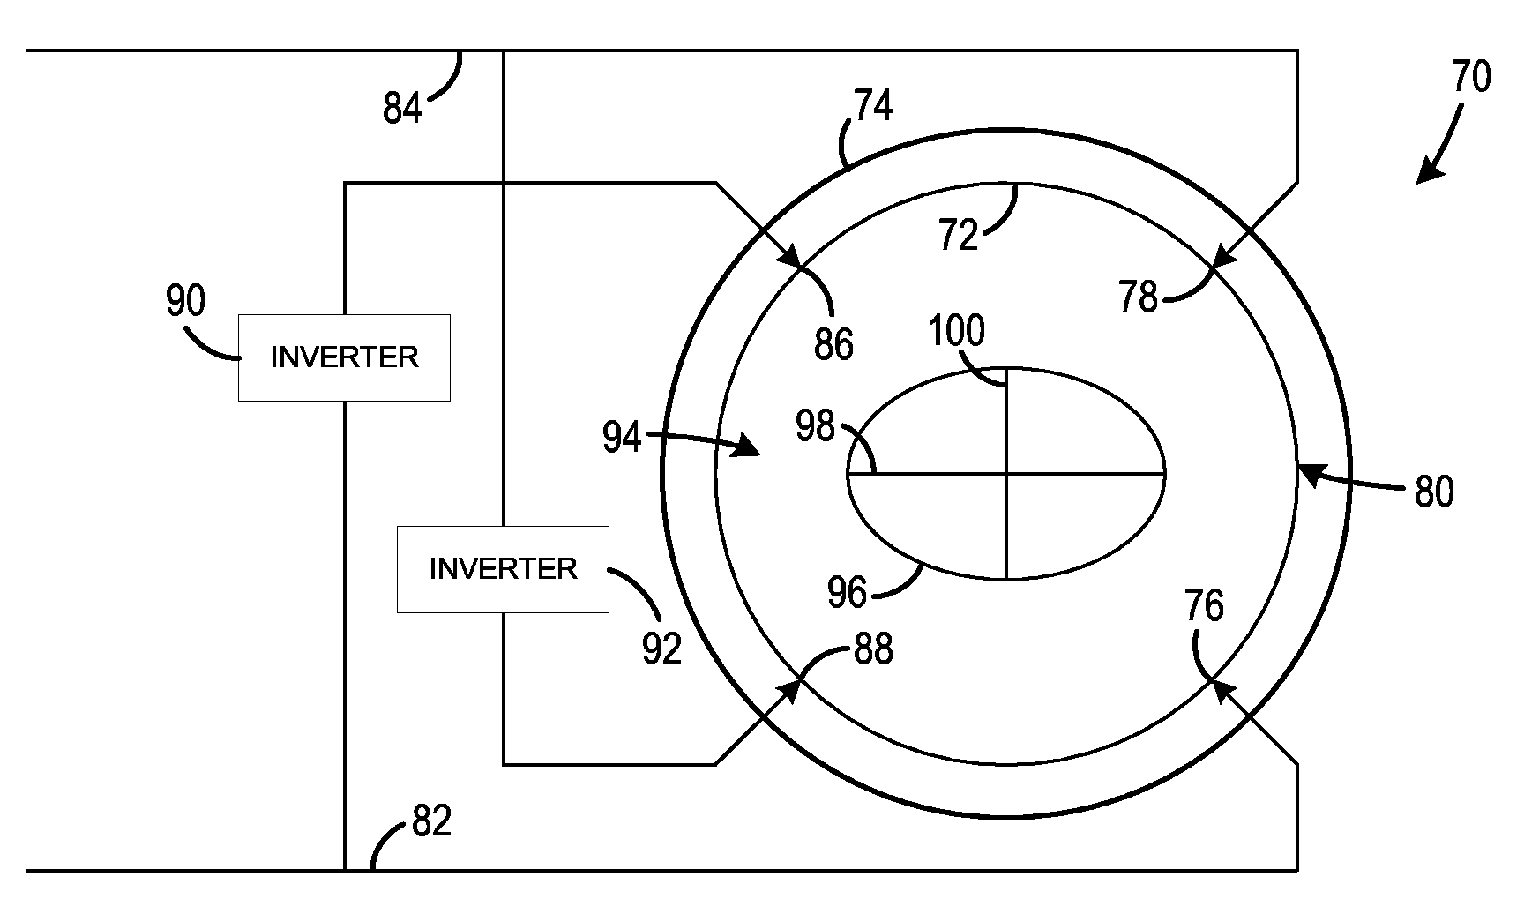 System and method of elliptically driving an MRI Coil